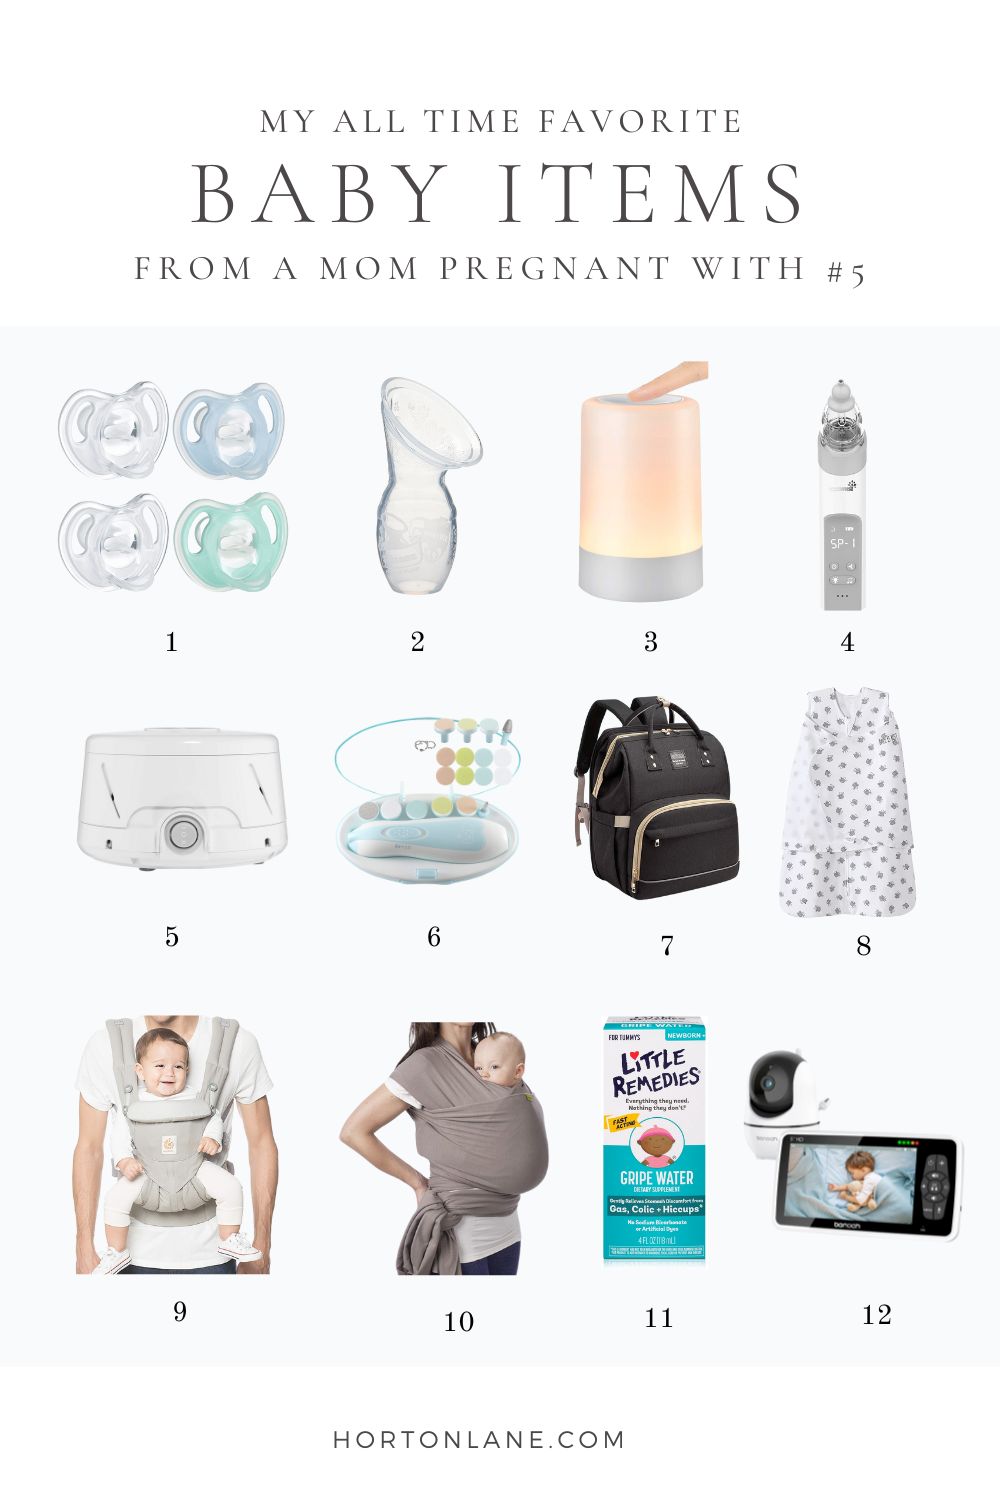 Pinterest Collage- Top baby items to add to baby registry must haves favorite baby items